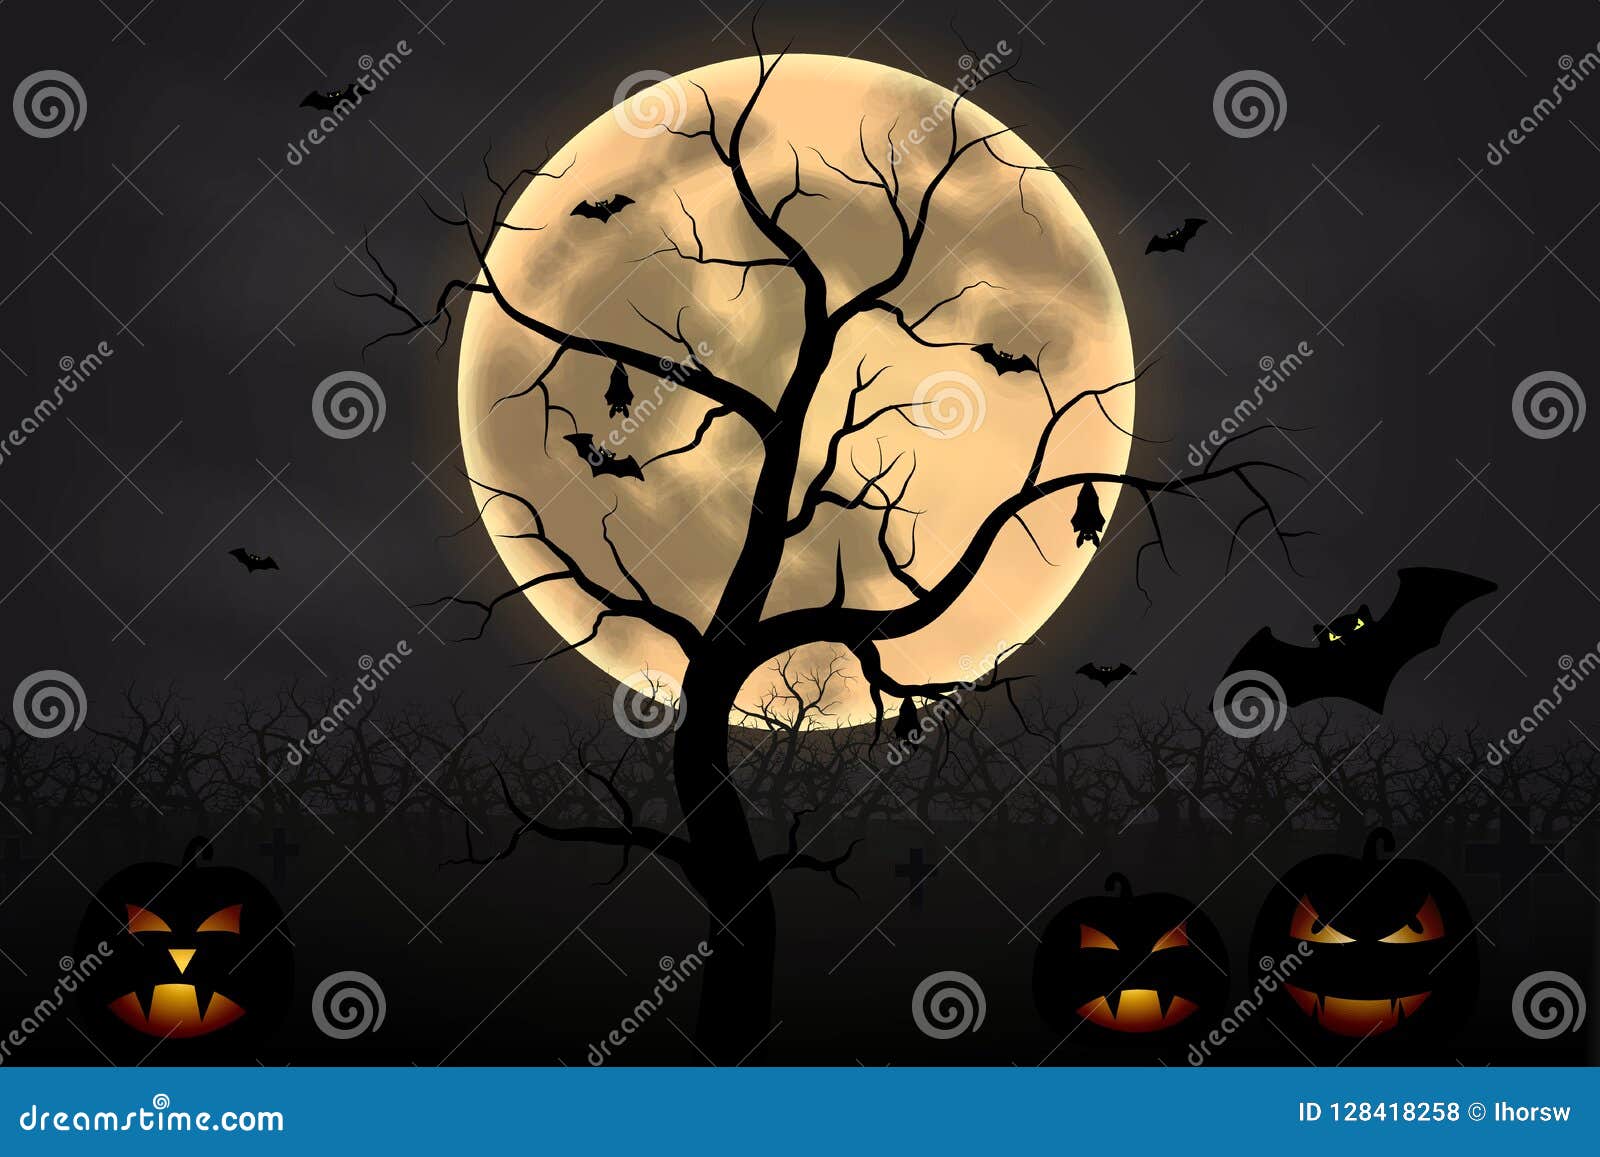 Halloween Background with Tree, Full Moon and Pumpkins in Dark Night  Isolated. Halloween Moon, Scary Stock Vector - Illustration of forest,  graphic: 128418258